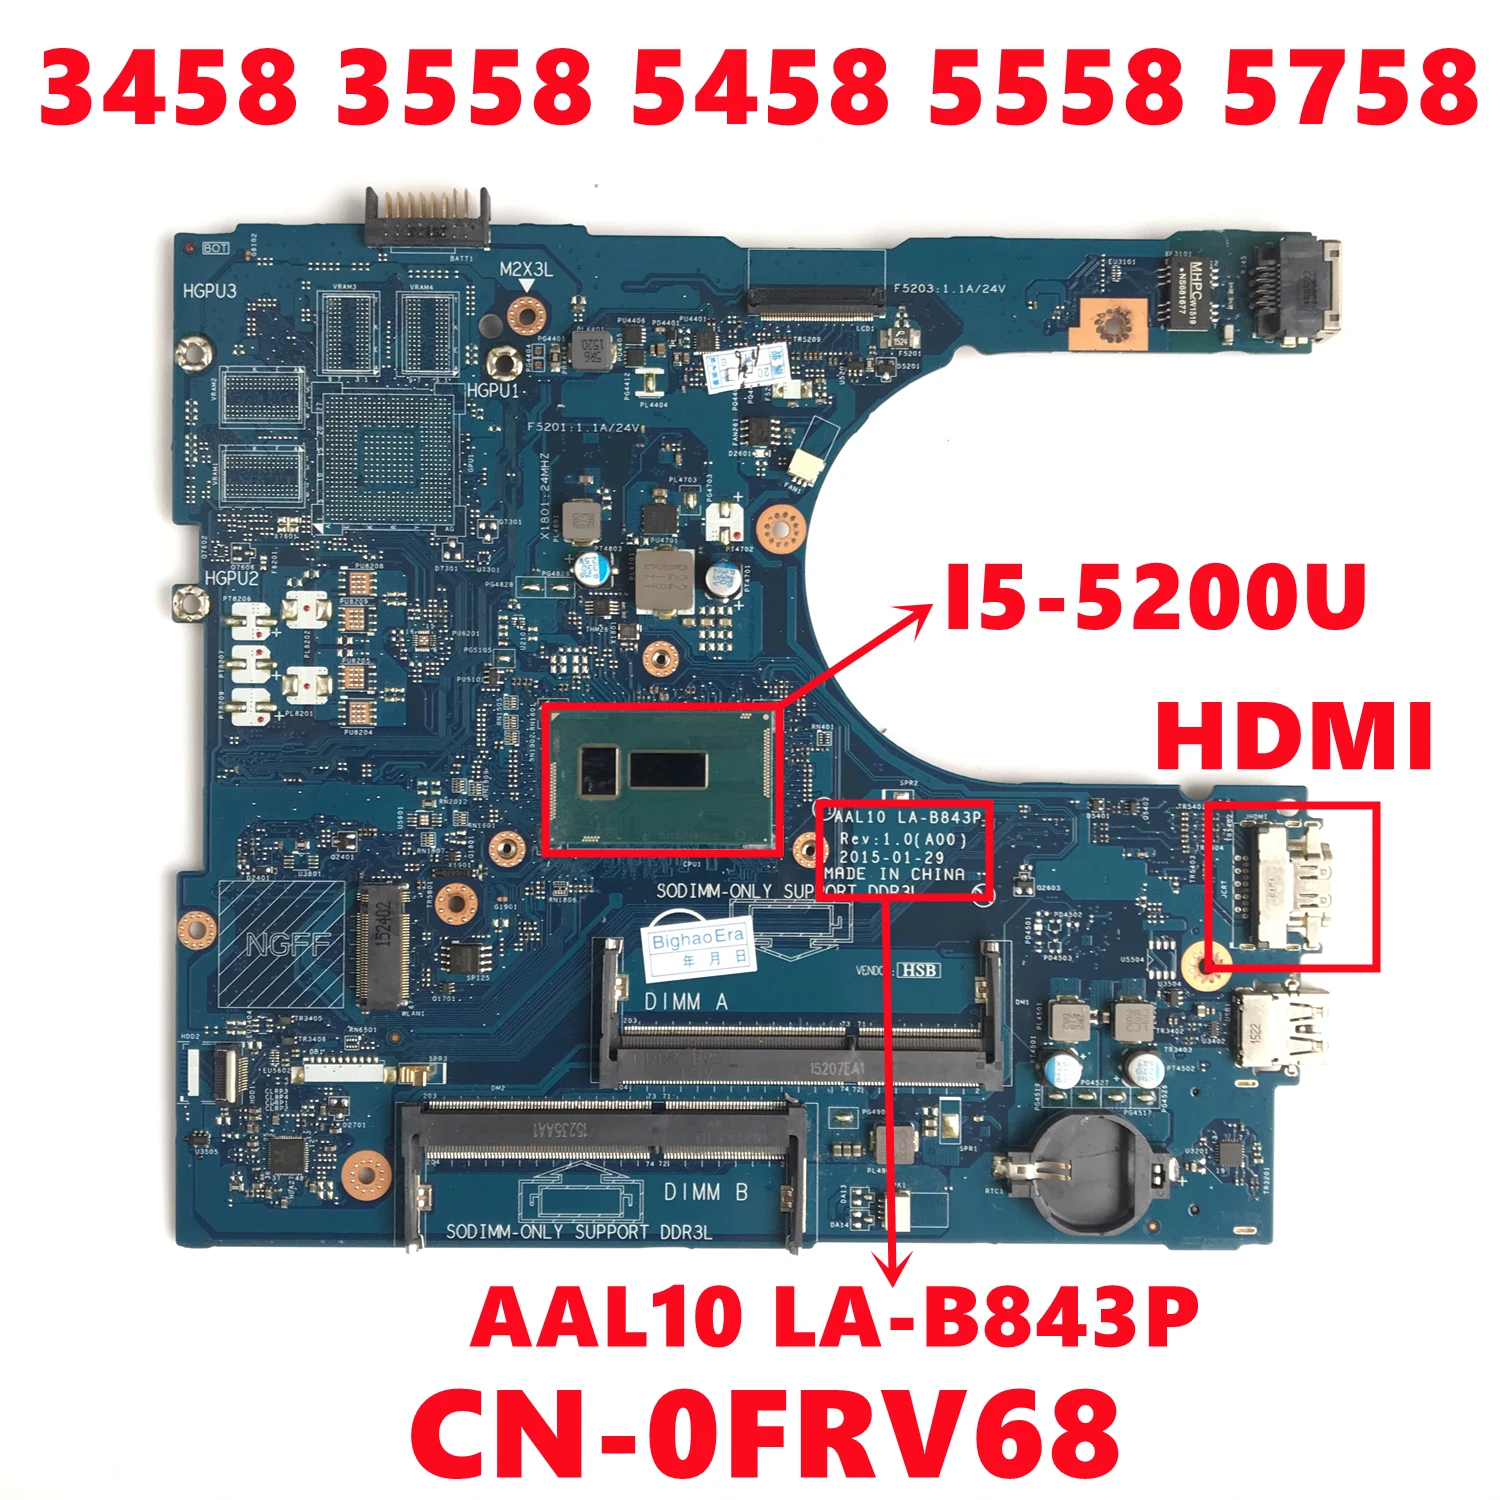 CN-0FRV68 0FRV68 FRV68 For dell Inspiron 3458 3558 5458 5558 5758 Laptop Motherboard AAL10 LA-B843P With I5-5200U CPU 100% Test